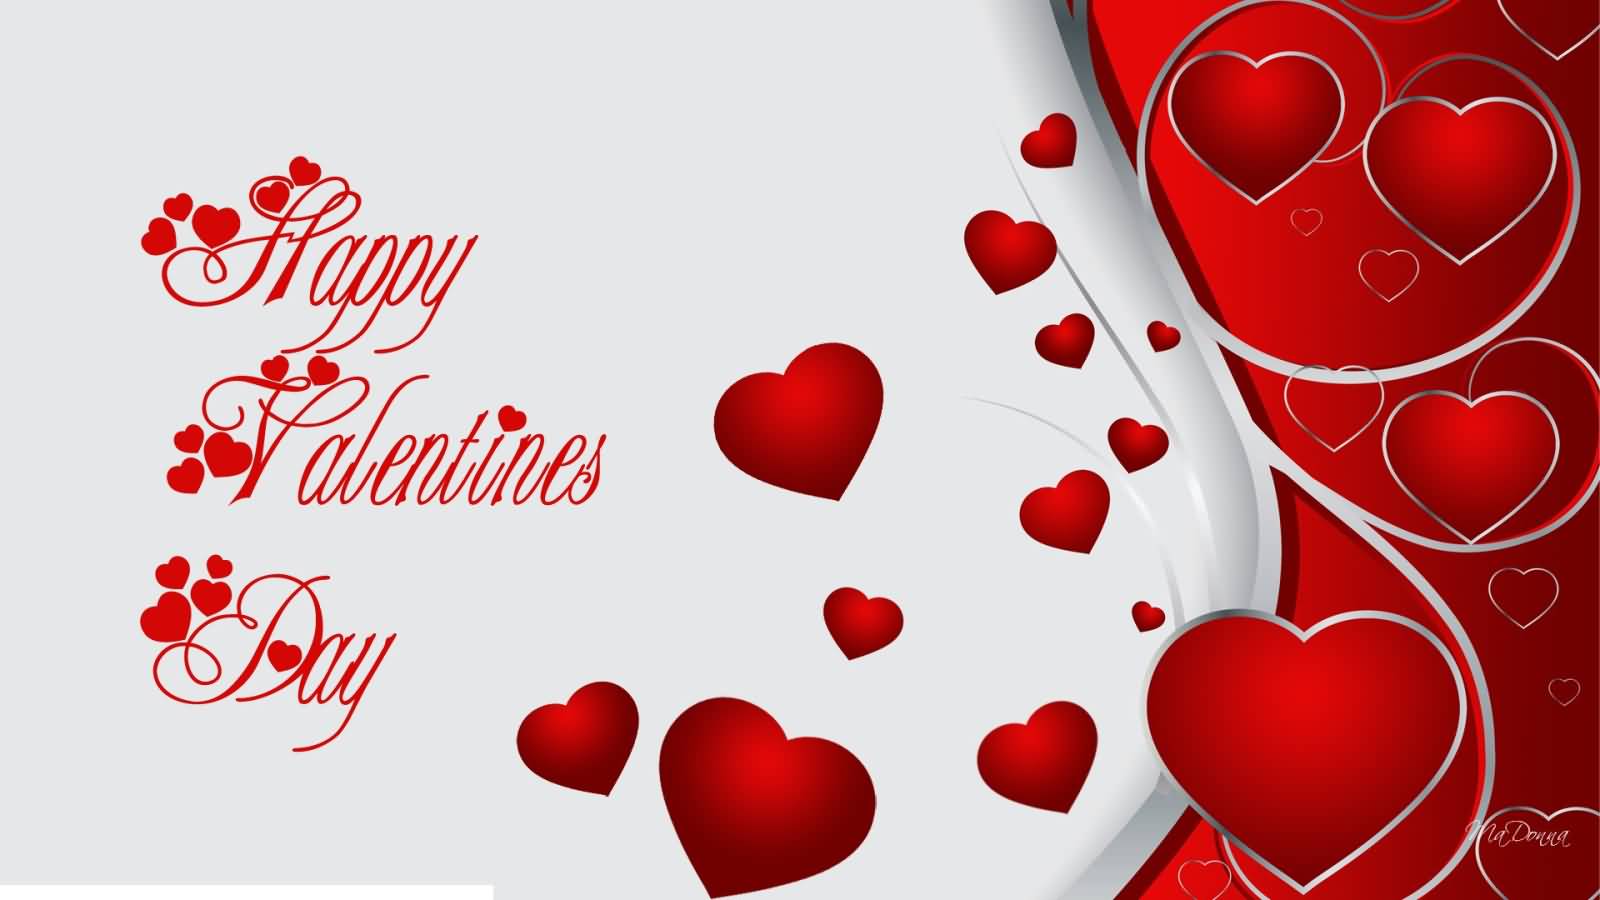 Happy Valentine’s Day Red Hearts Wallpaper